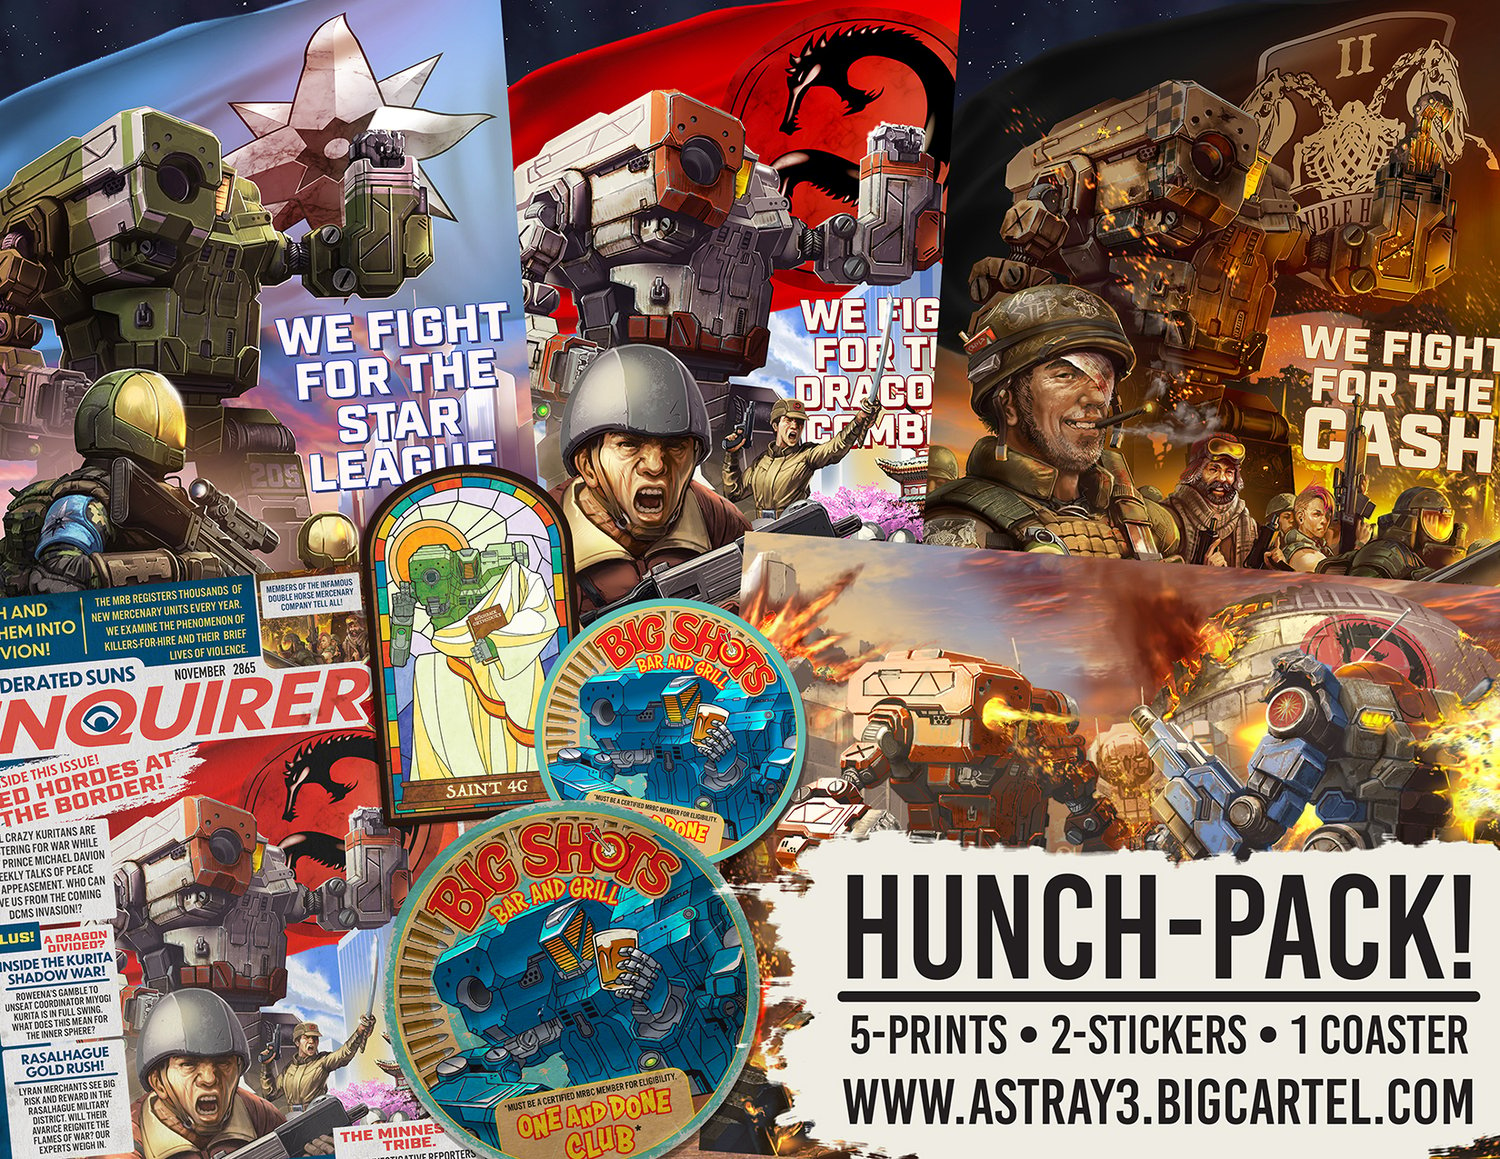 Image of The HUNCH-PACK! Hunchback print pack!